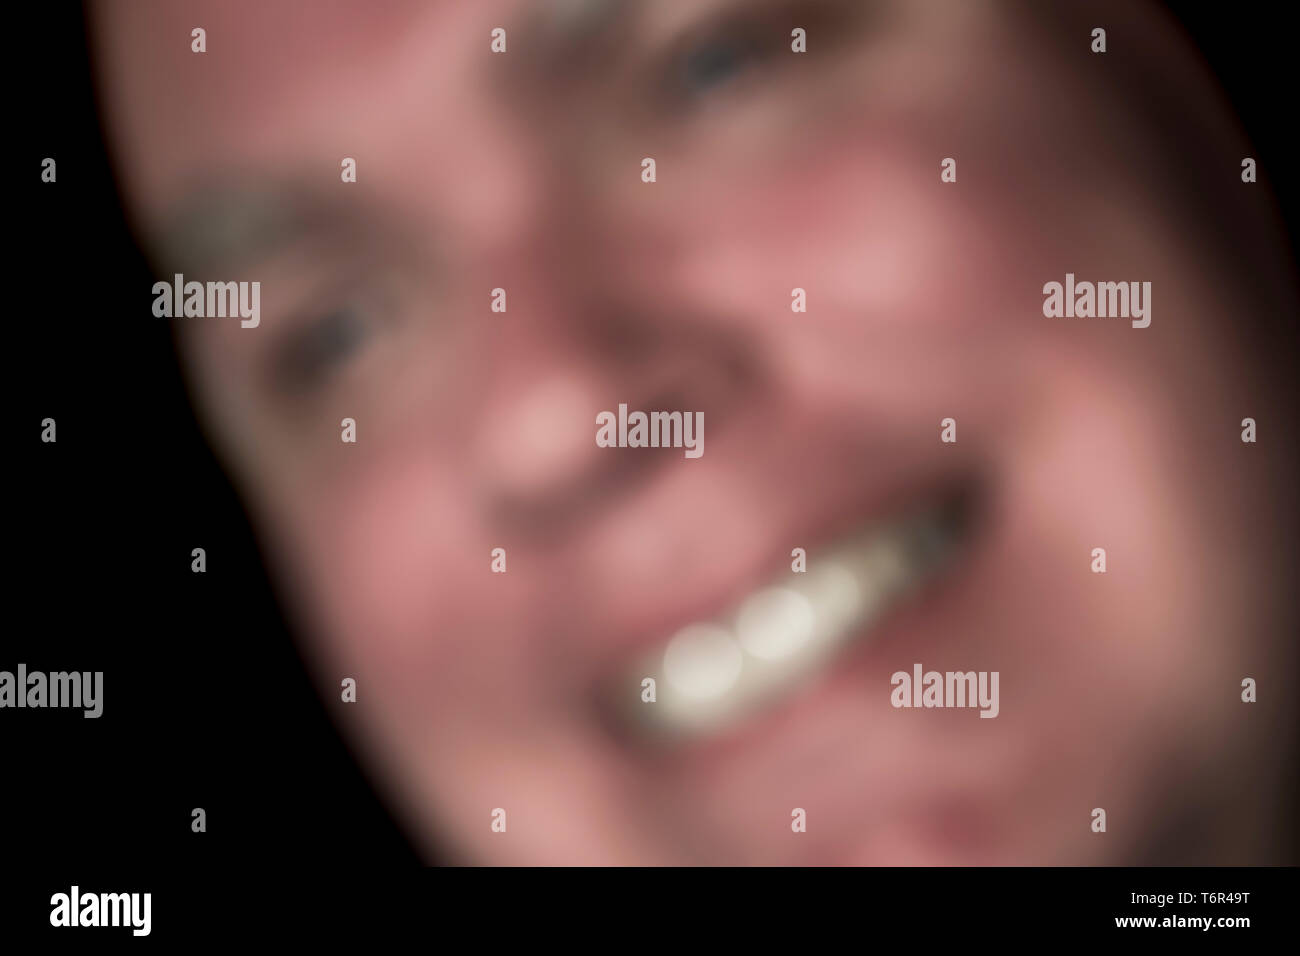 Blurred abstract image of a man with a happy, content, smiling face. Blurry image showing concept of happiness and contentment. Stock Photo